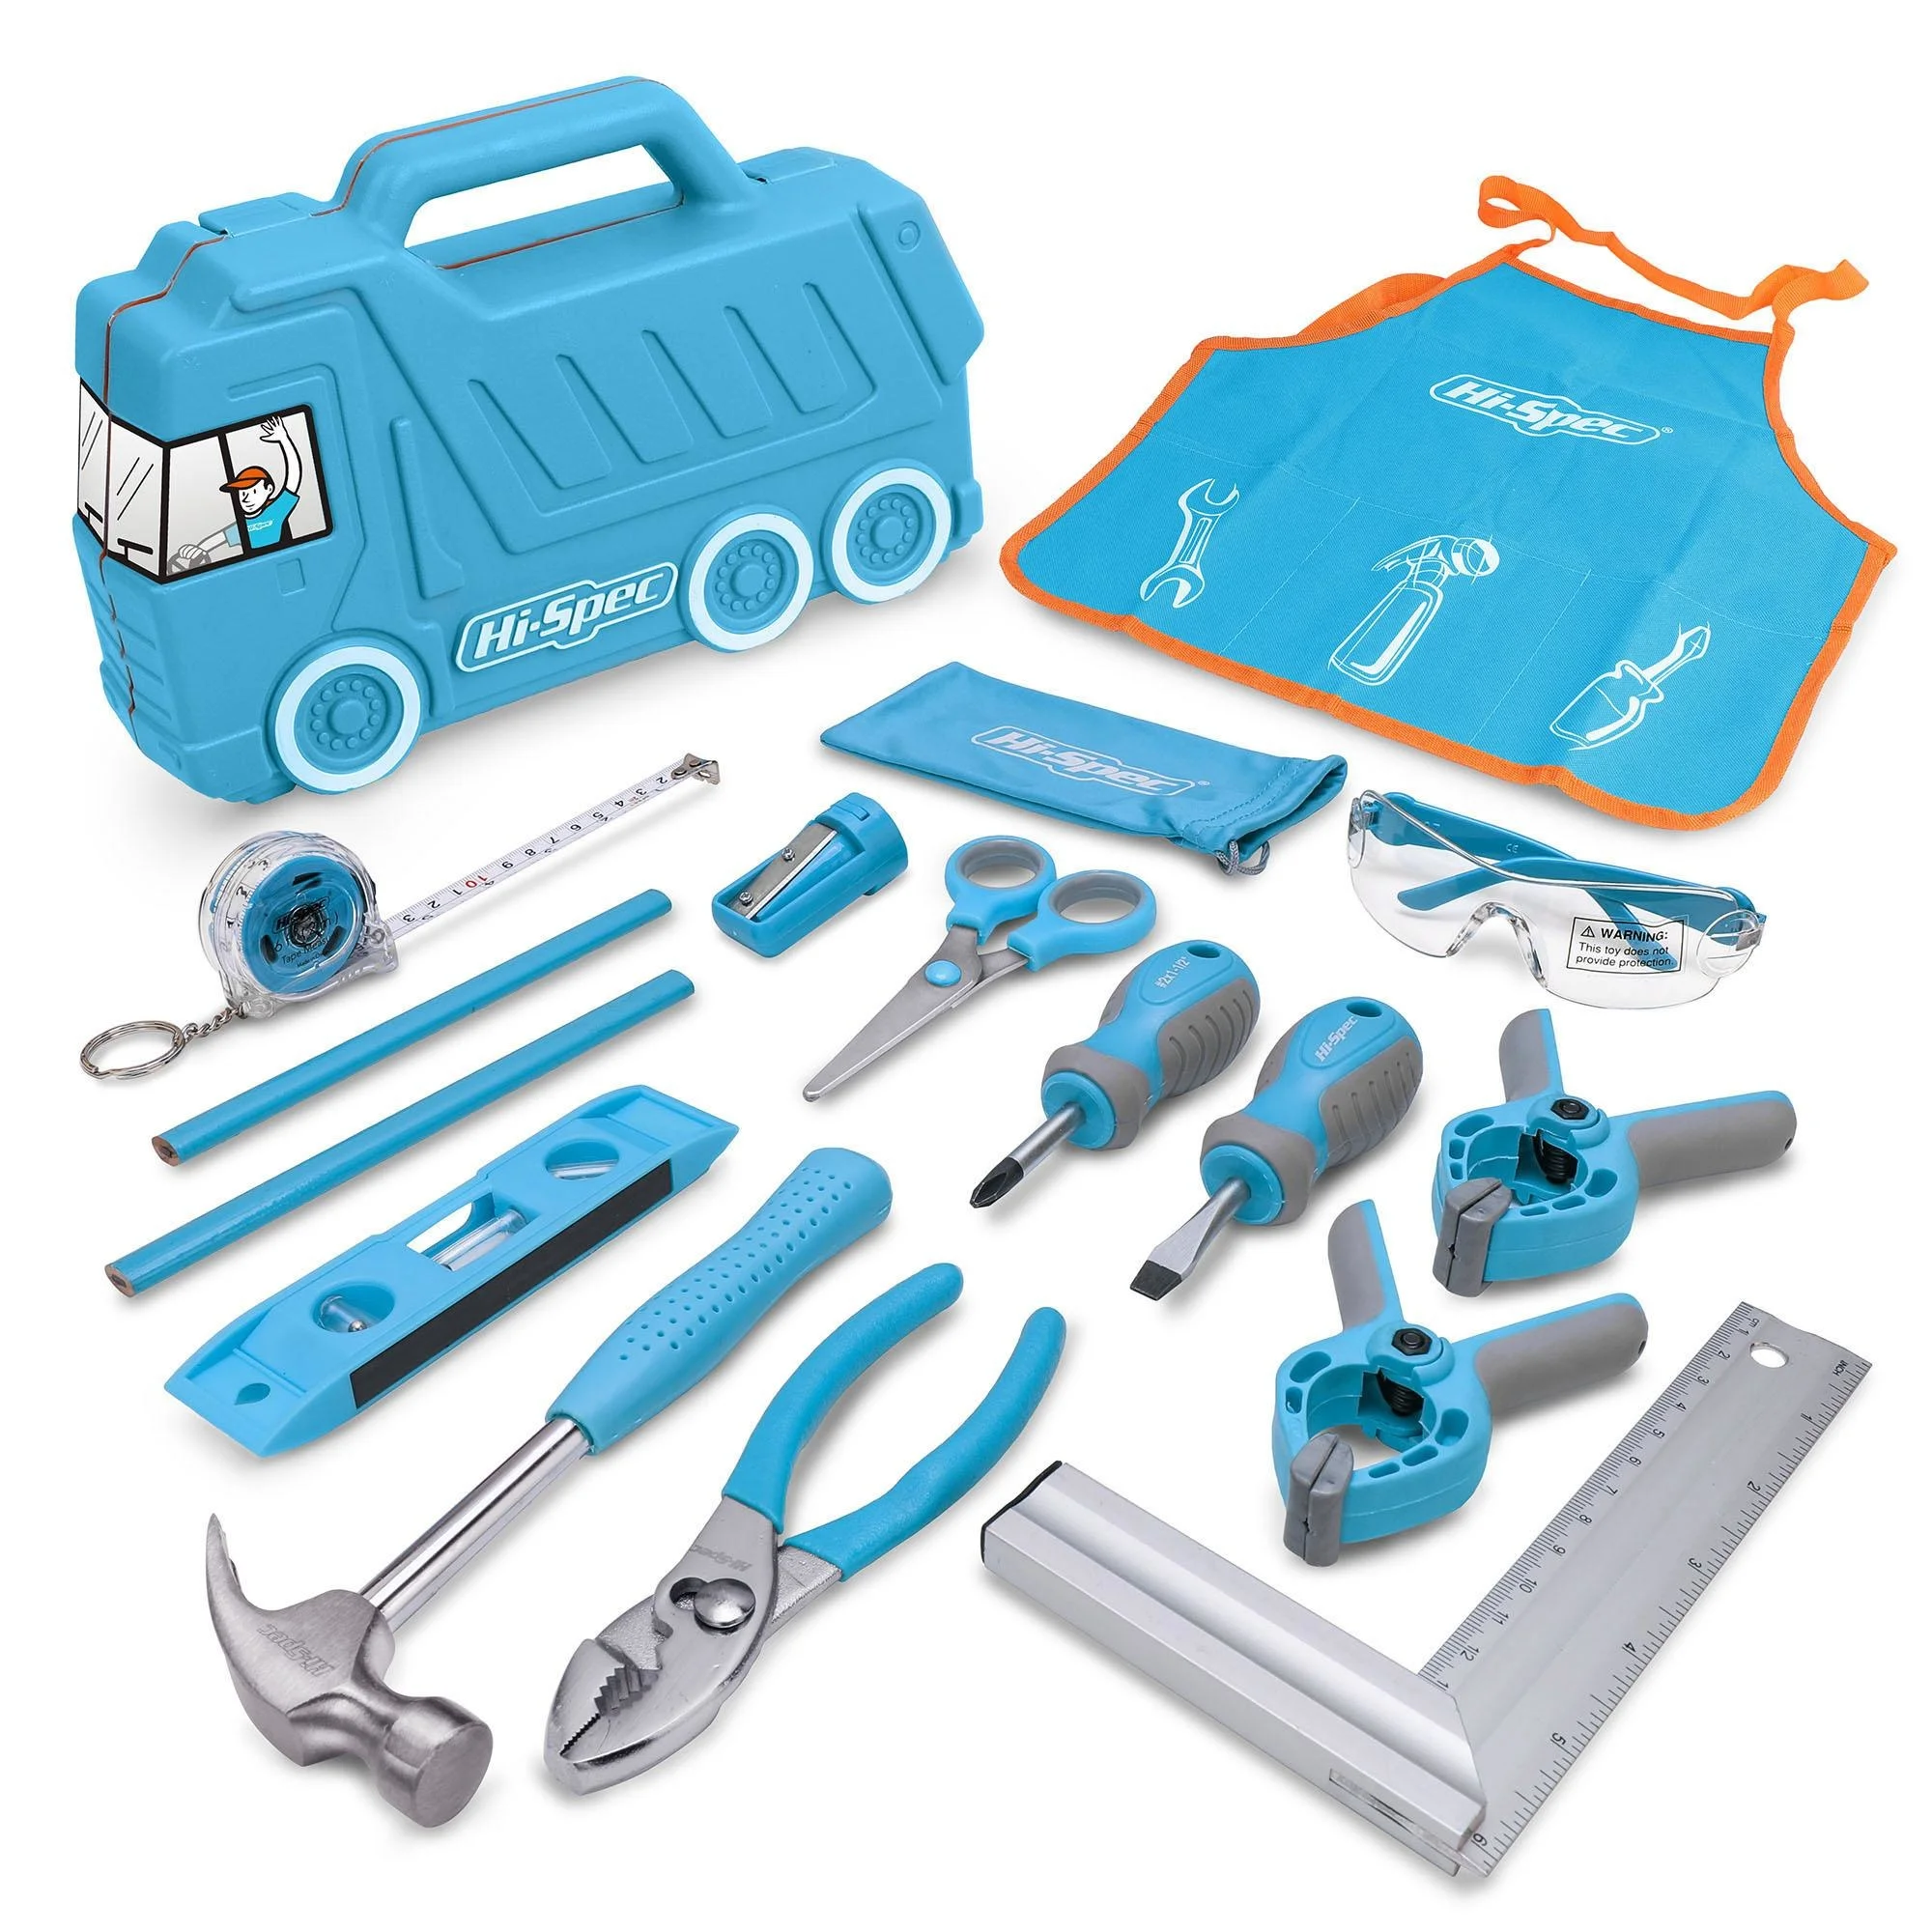 Hi-Spec 17pc Blue Kids Tool Set Real Home Tool Set Car Shaped Case Learning DIY Tool Kit Set Woodworking Hand Tools for Boys